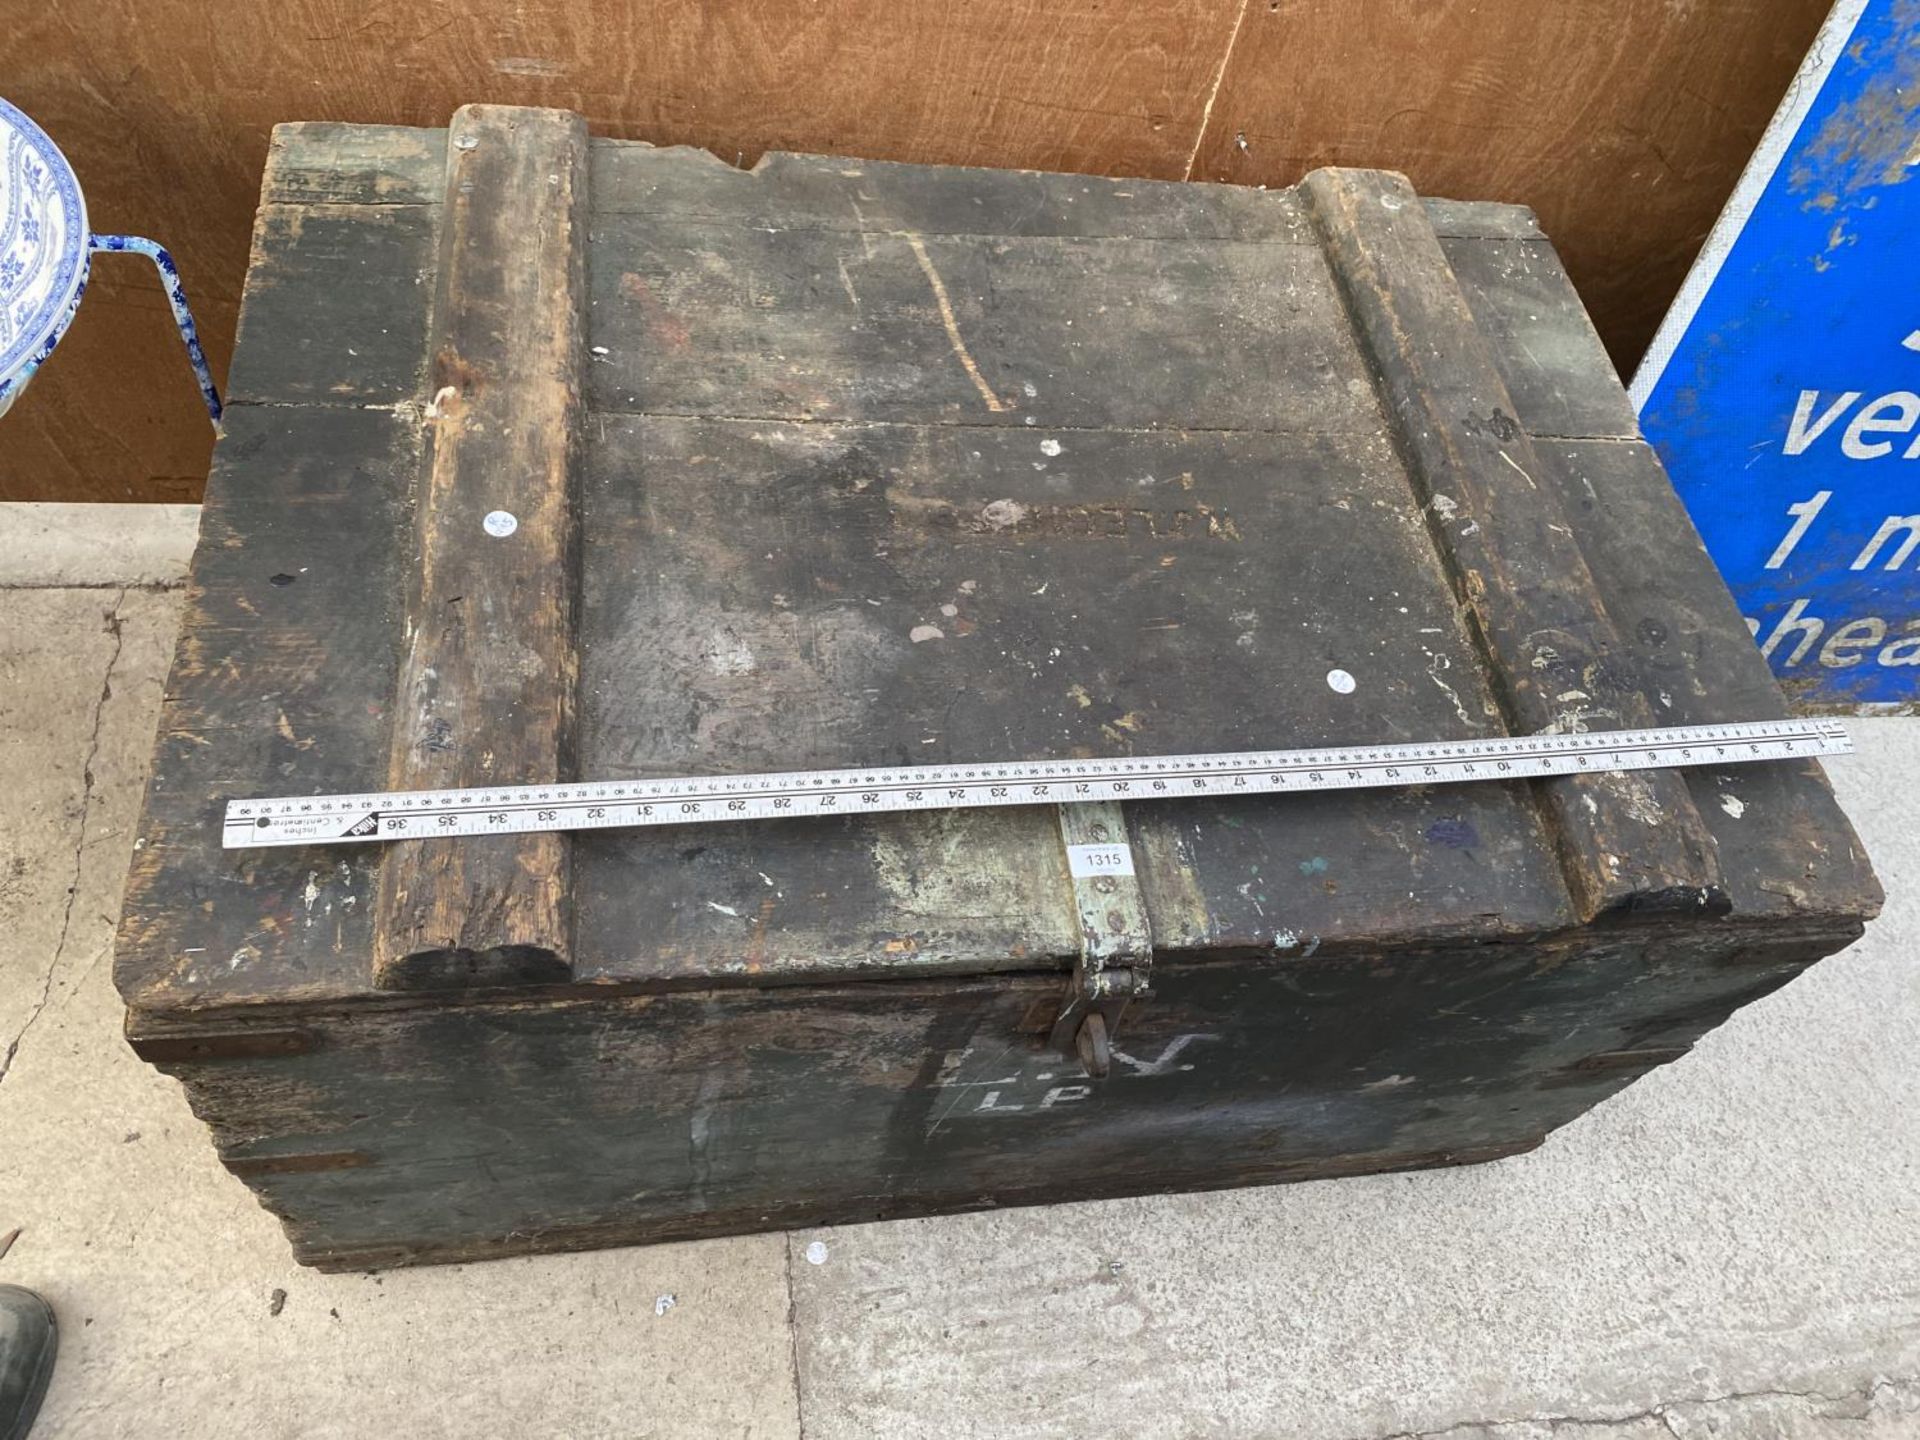 A LARGE VINTAGE WOODEN CHEST WITH METAL BANDING - Image 4 of 6